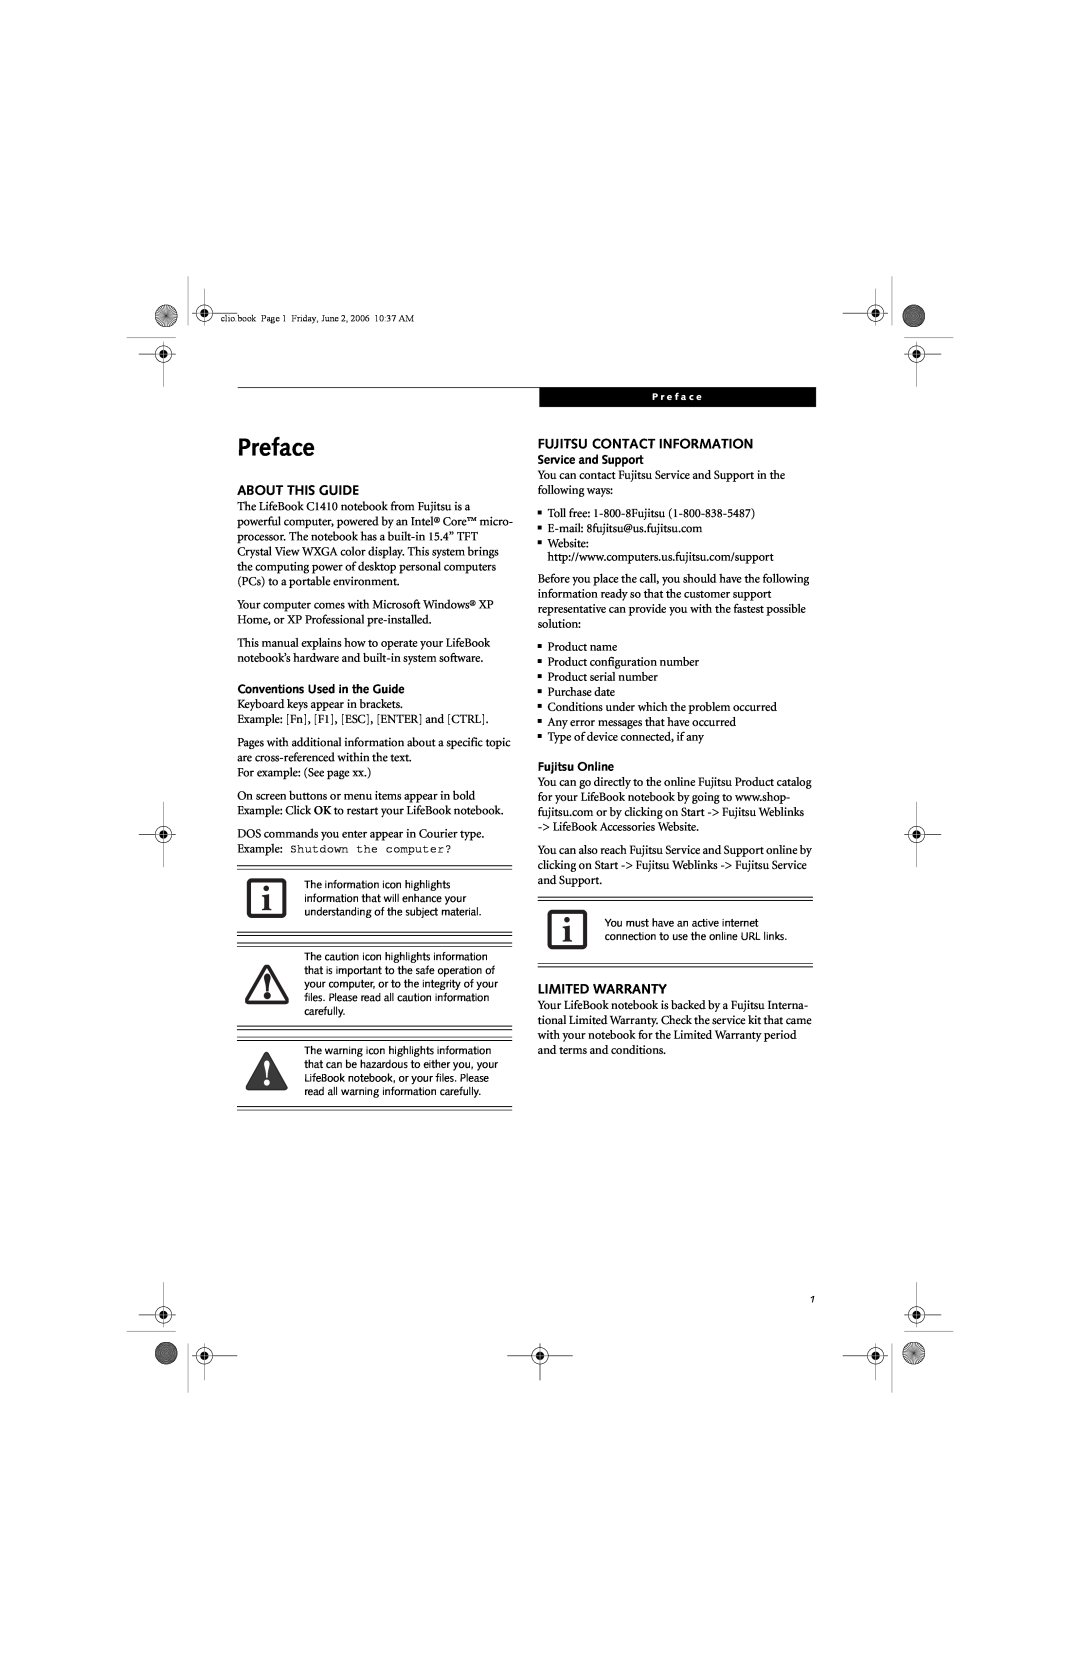 Fujitsu C1410 Preface, About This Guide, Fujitsu Contact Information, Limited Warranty, Conventions Used in the Guide 